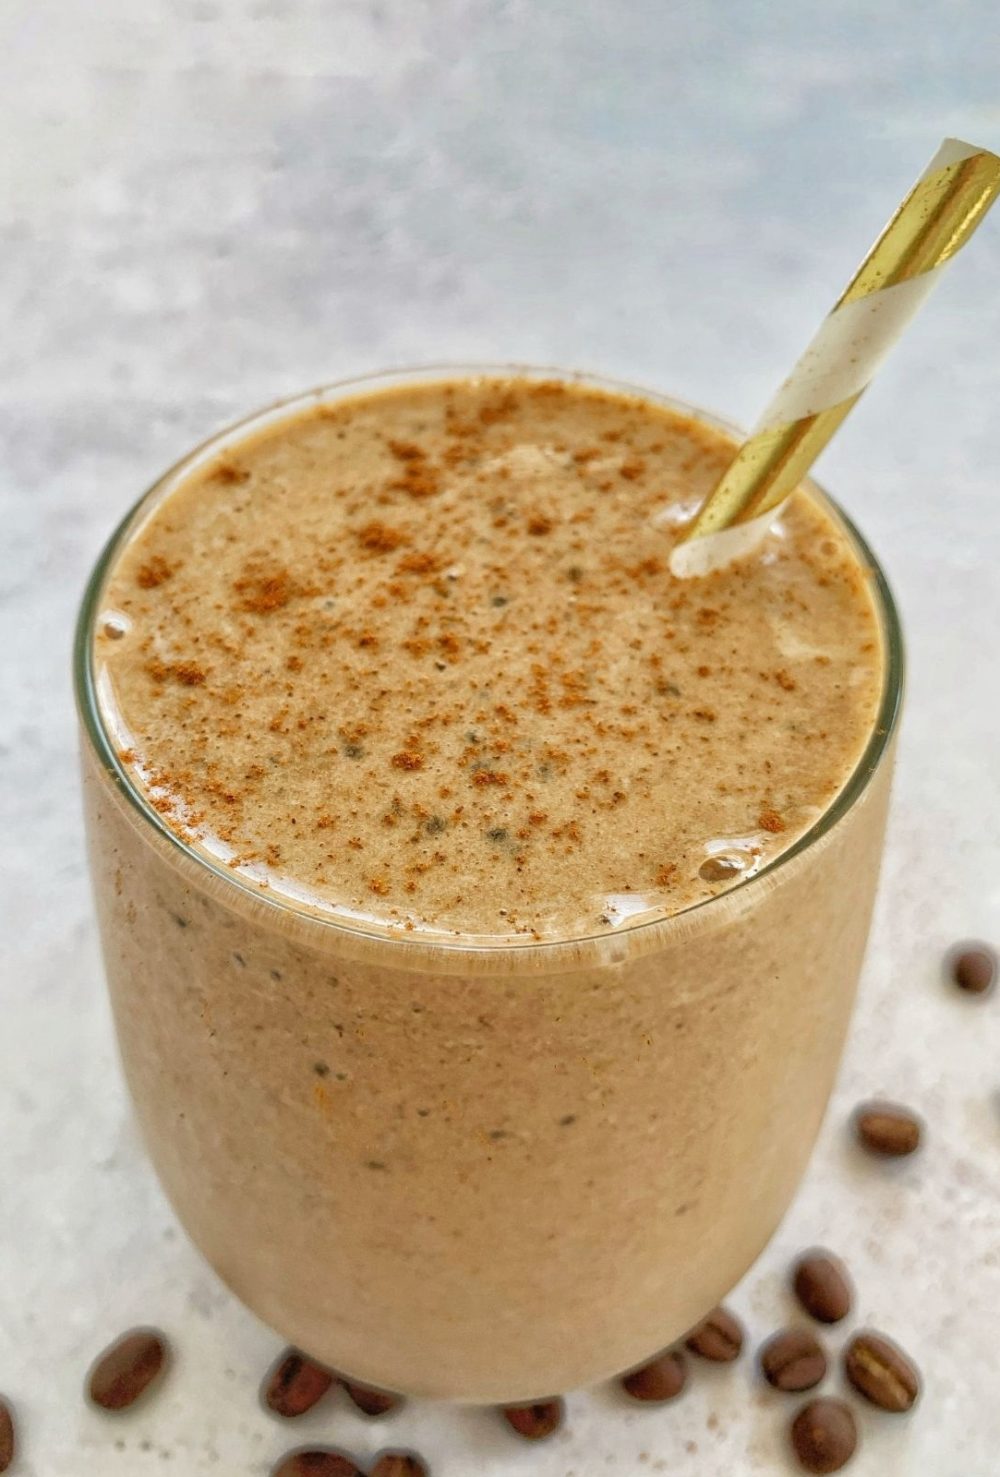 A coffee protein smoothie in a glass with a straw and coffee beans around it.